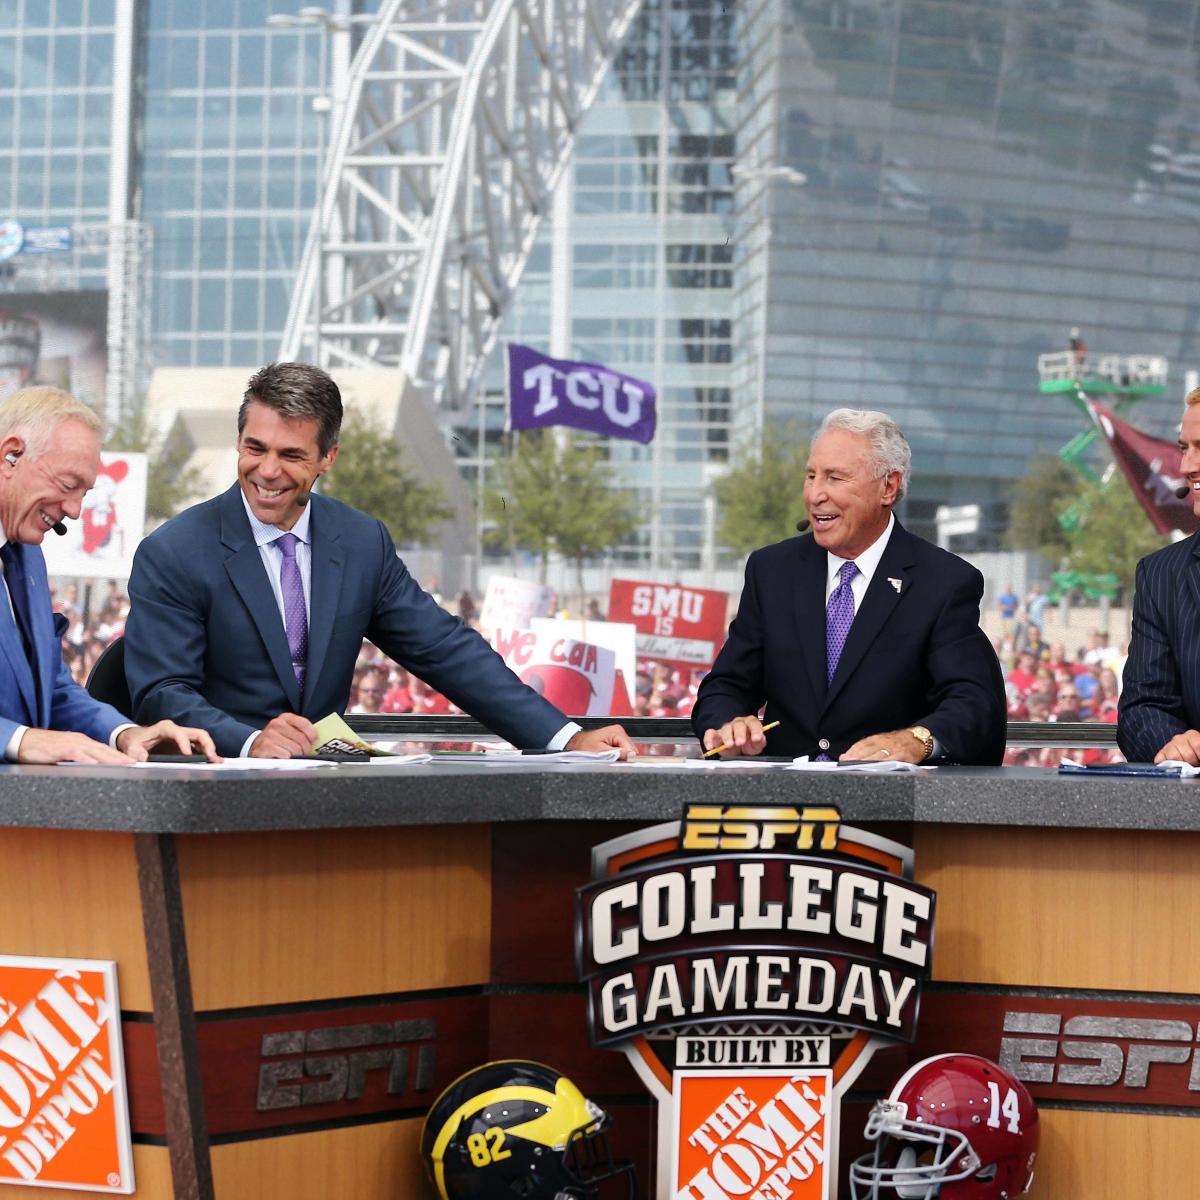 College Gameday 2012 Schedule: Previewing the Show's Top Destinations